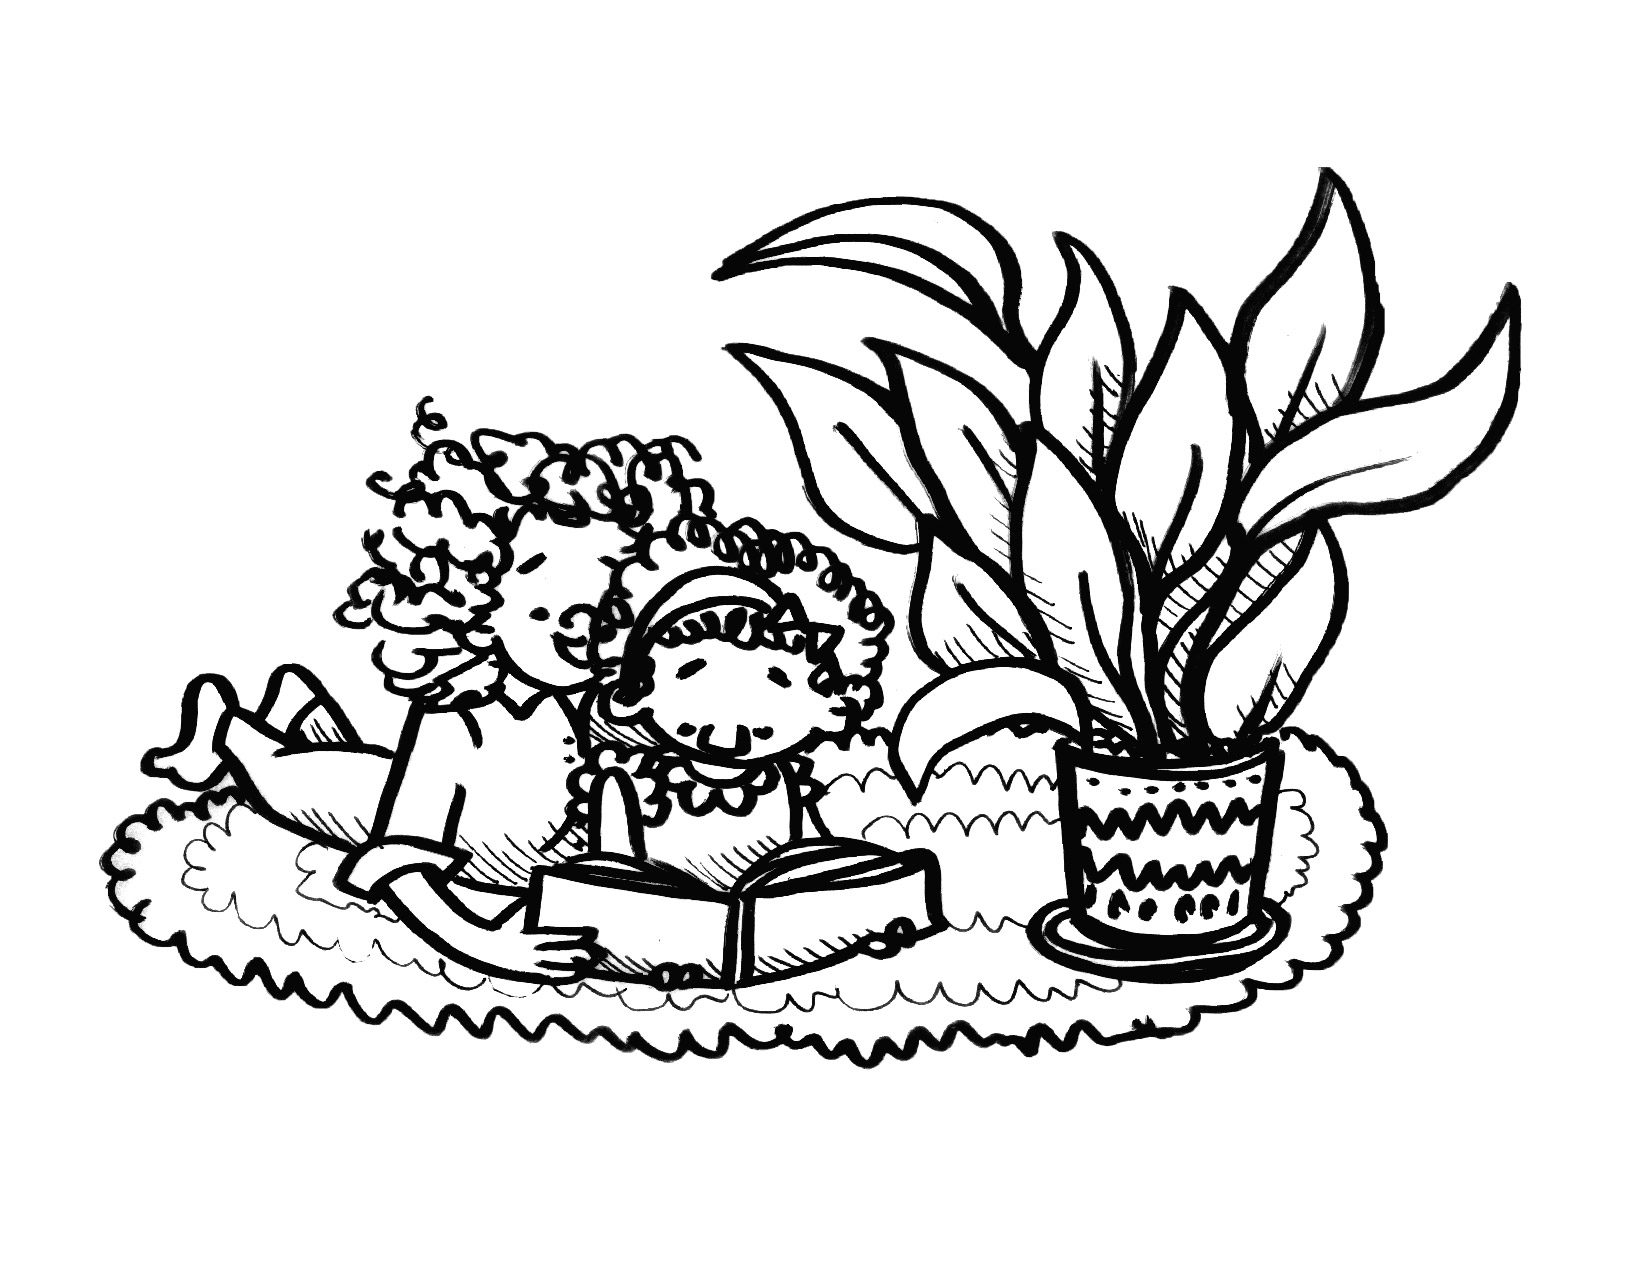 Coloring page of a girl reading to her younger sister